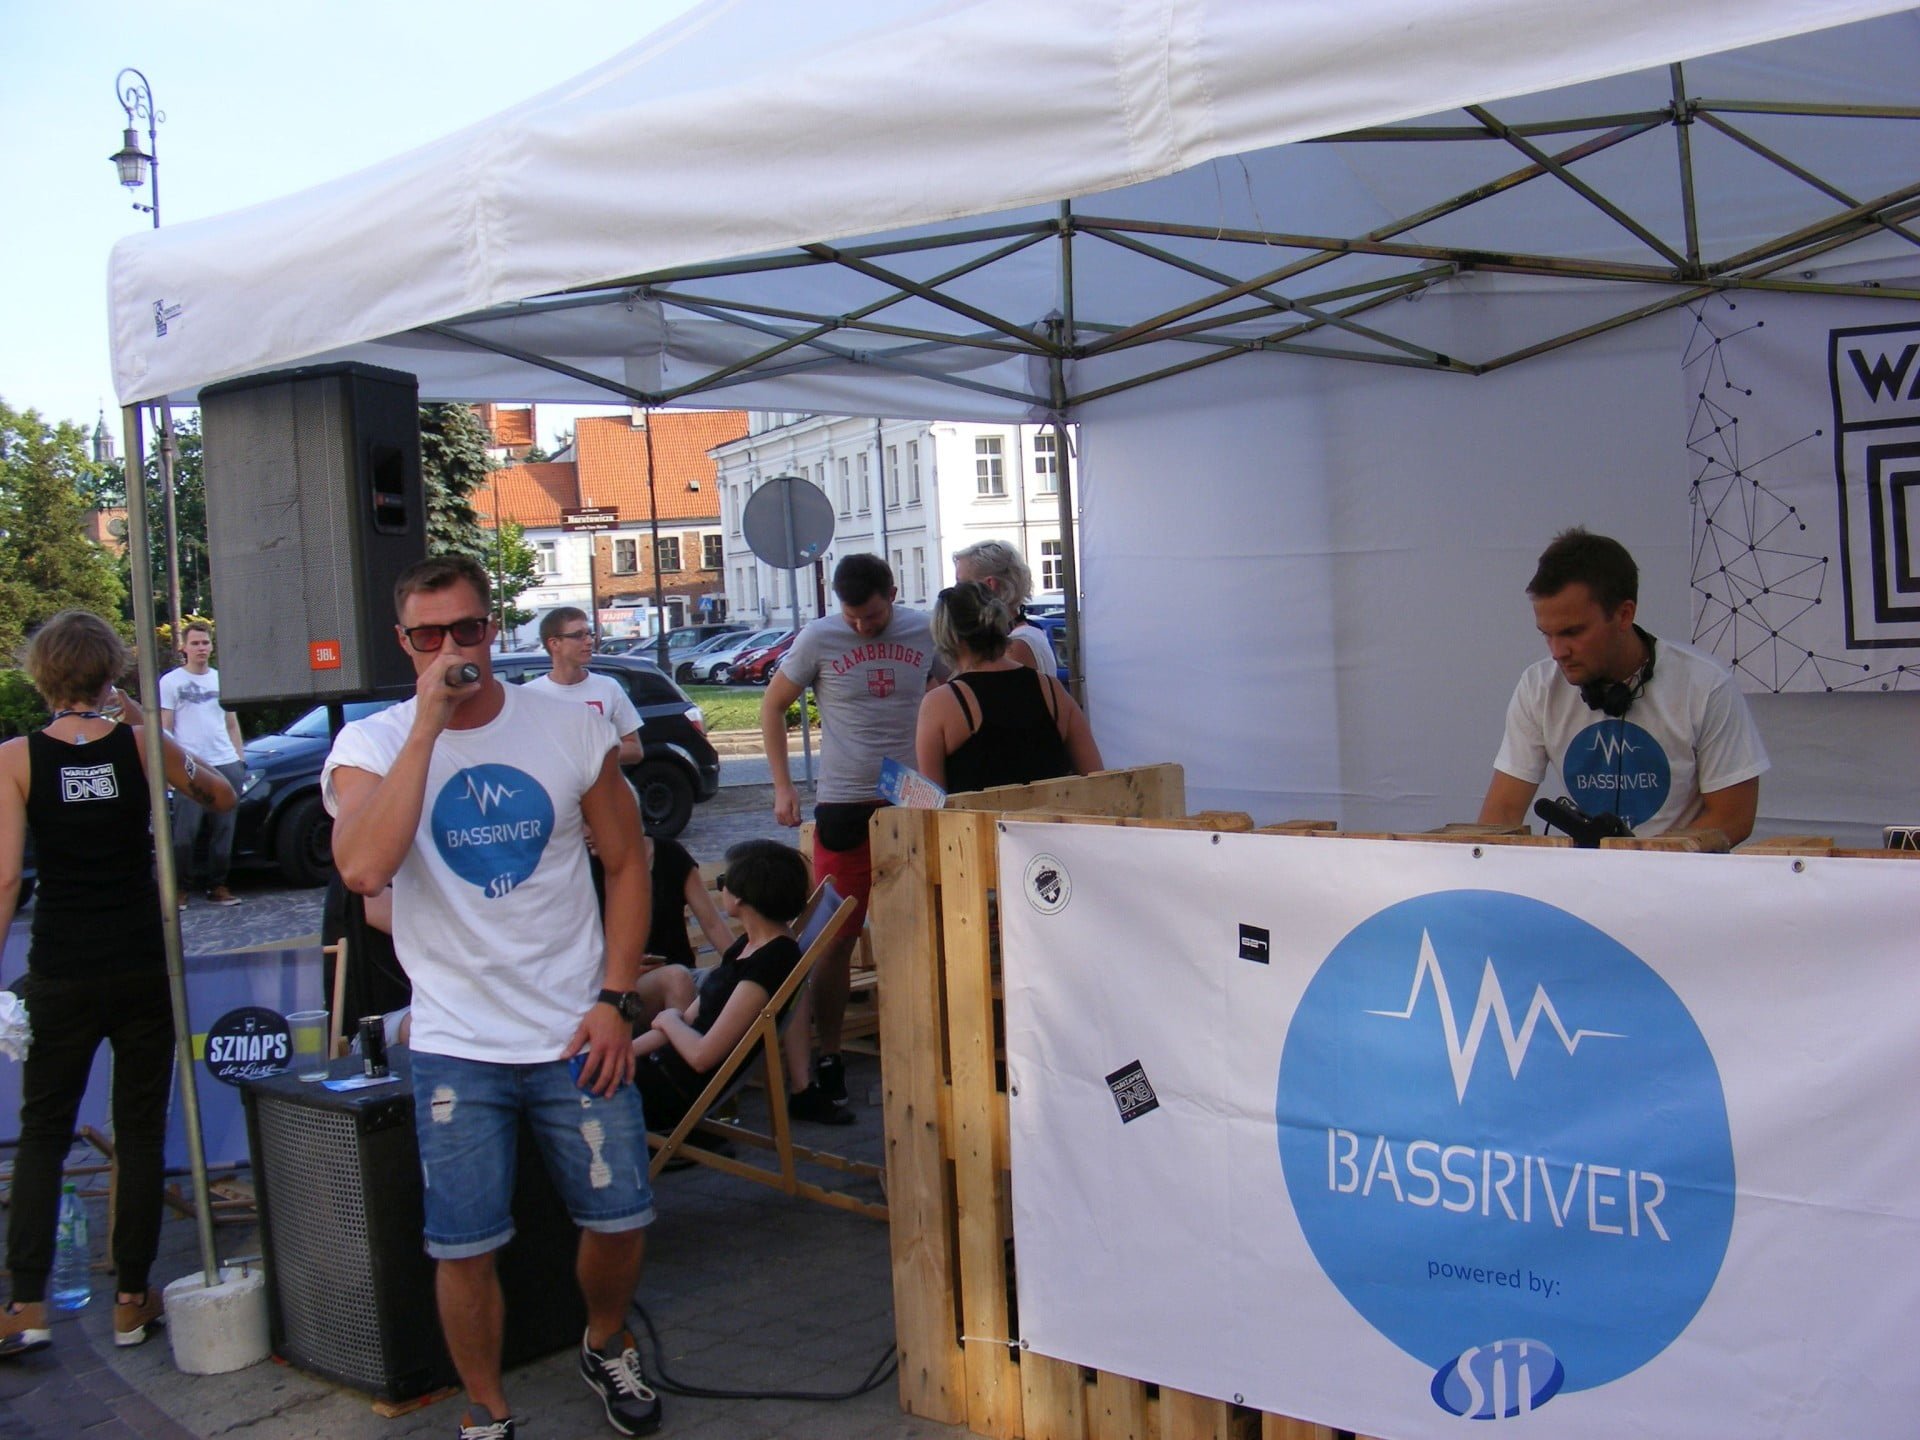 BassRiver powered by Sii 3